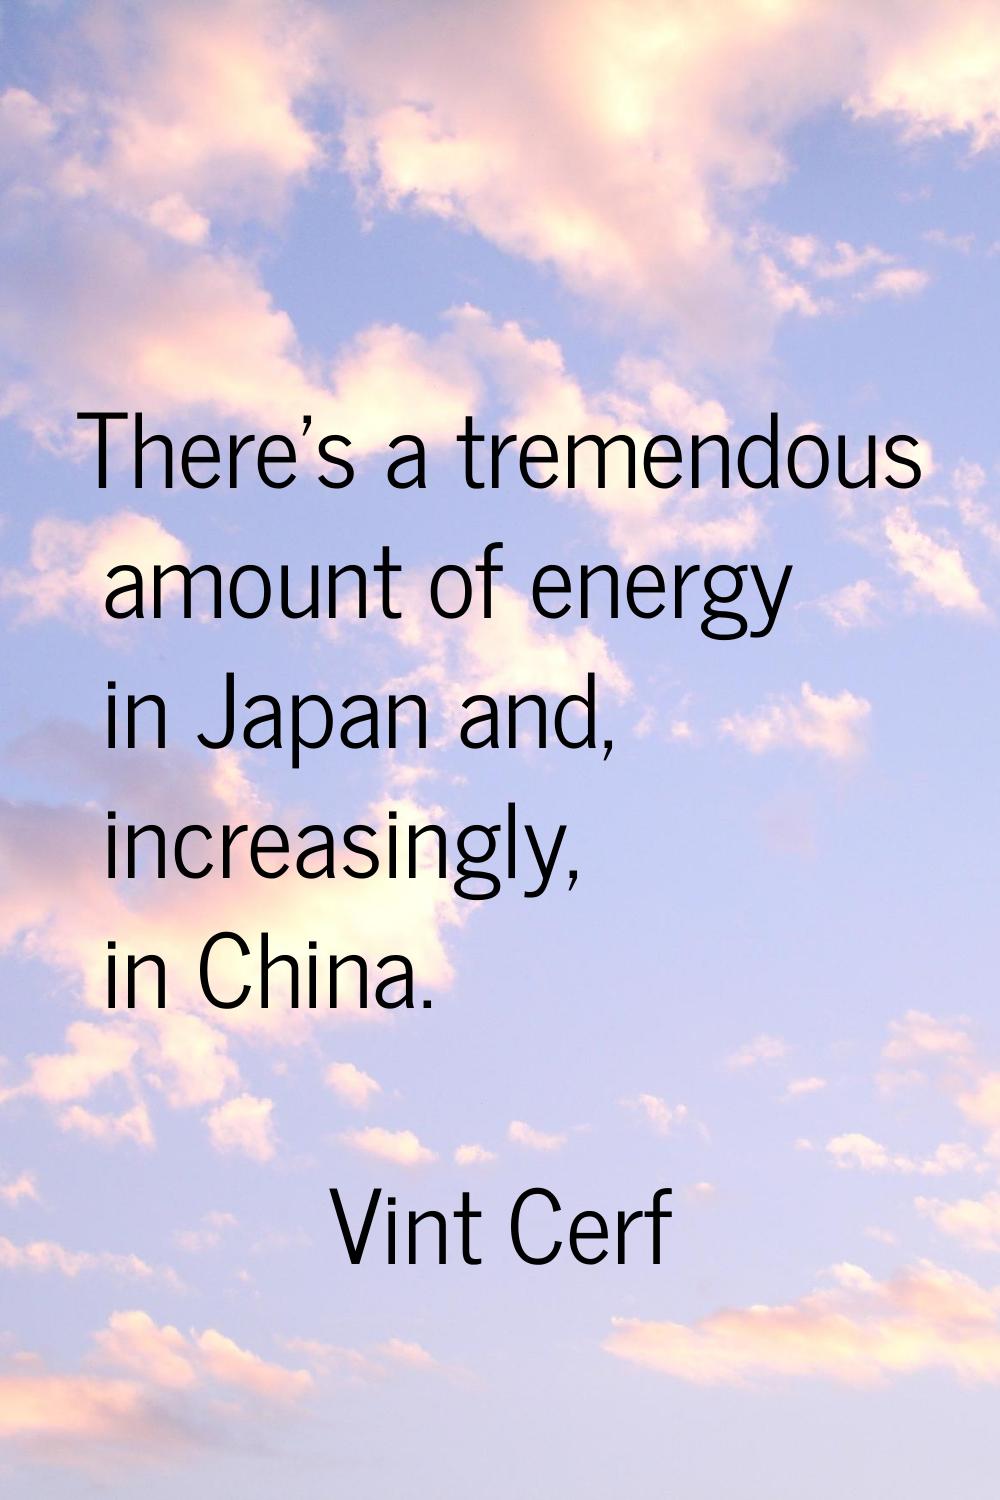 There's a tremendous amount of energy in Japan and, increasingly, in China.